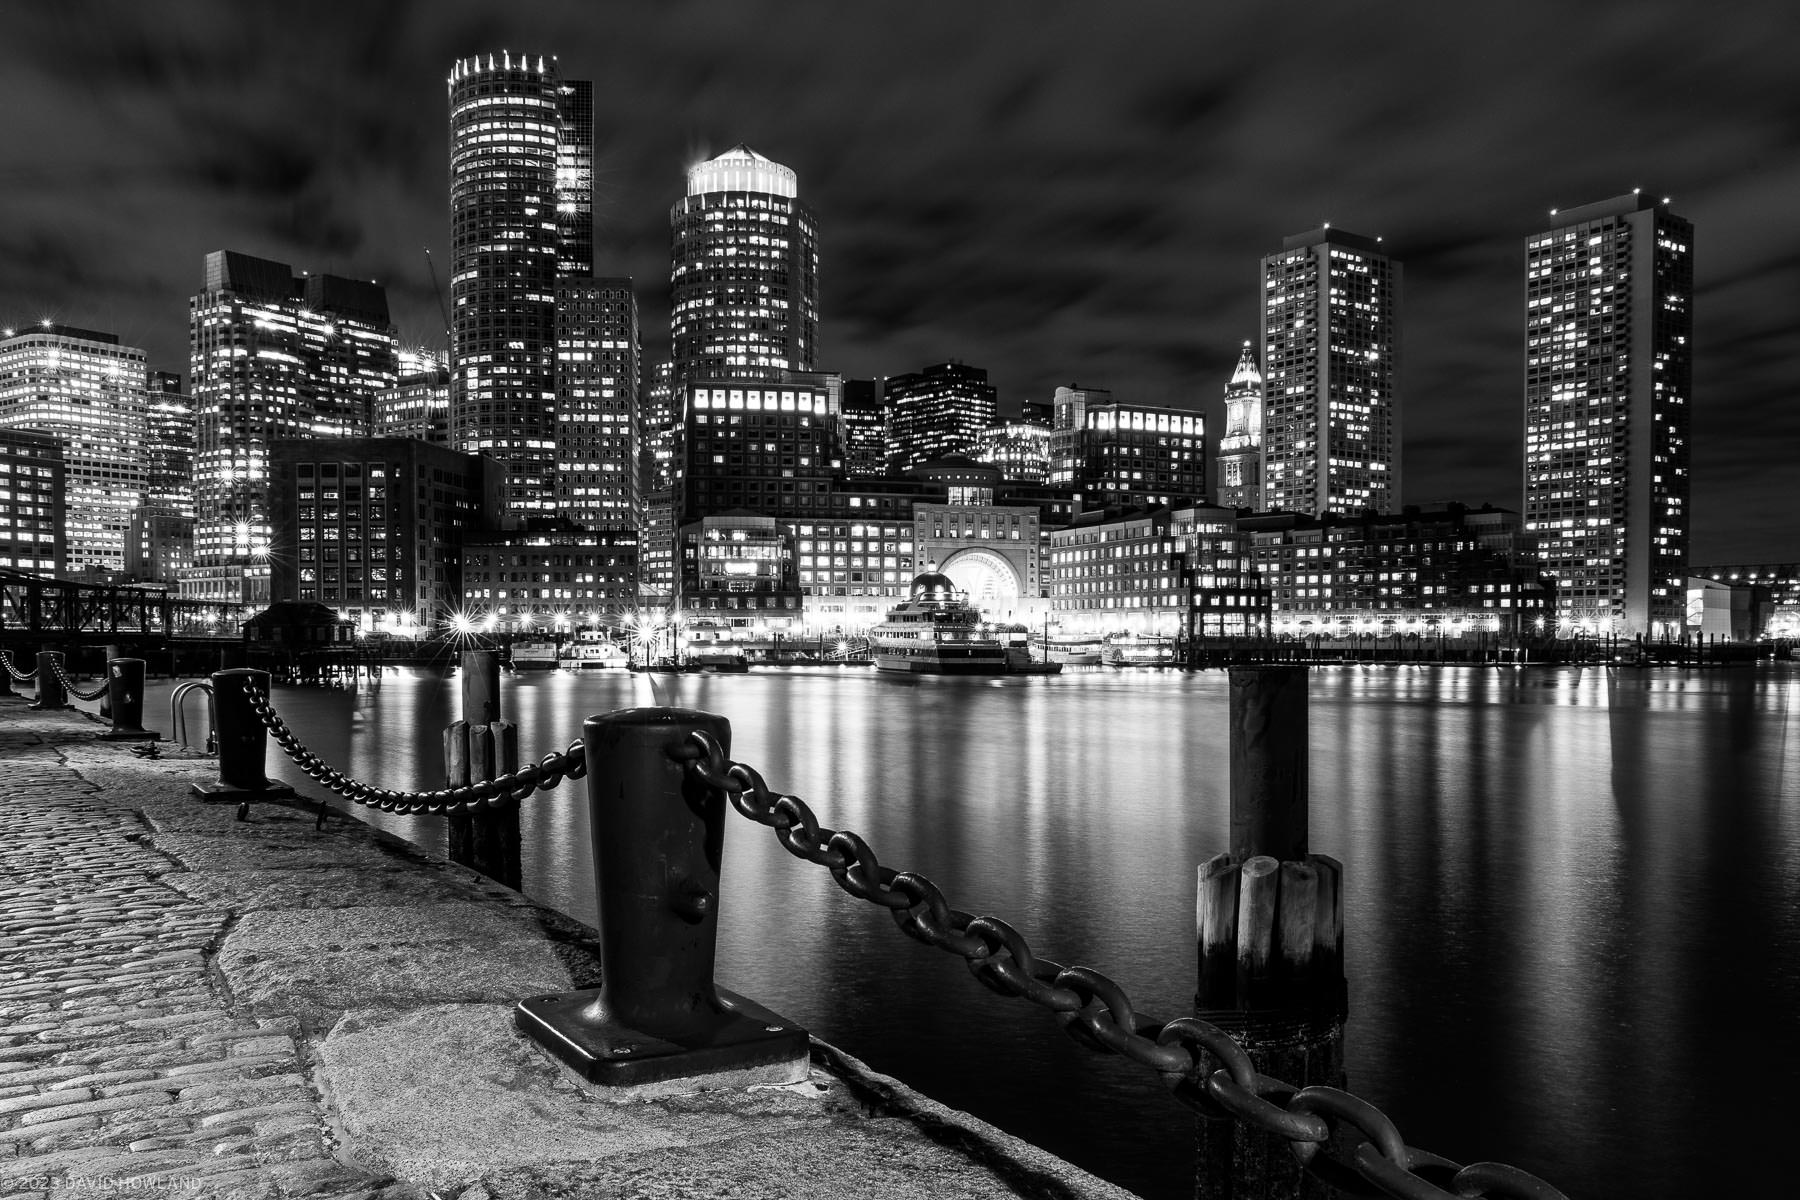 A black and white photo of the downtown Boston skyline with boats and Boston Harbor in the foreground.